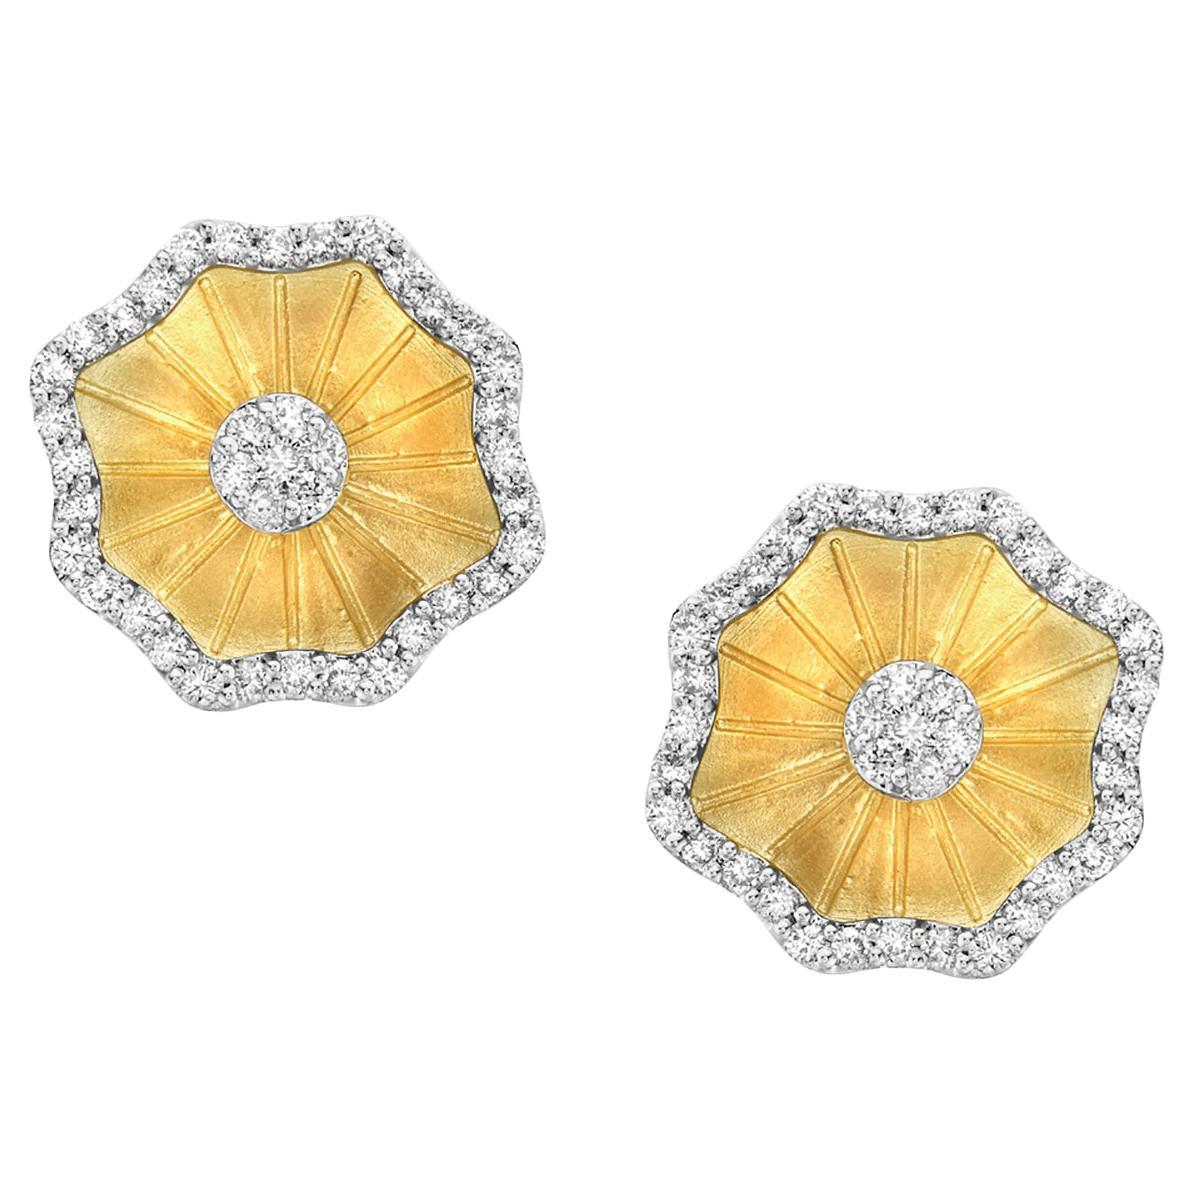 Flower Shaped Stud Earrings in 14k Yellow Gold with Diamonds on Edge & Center